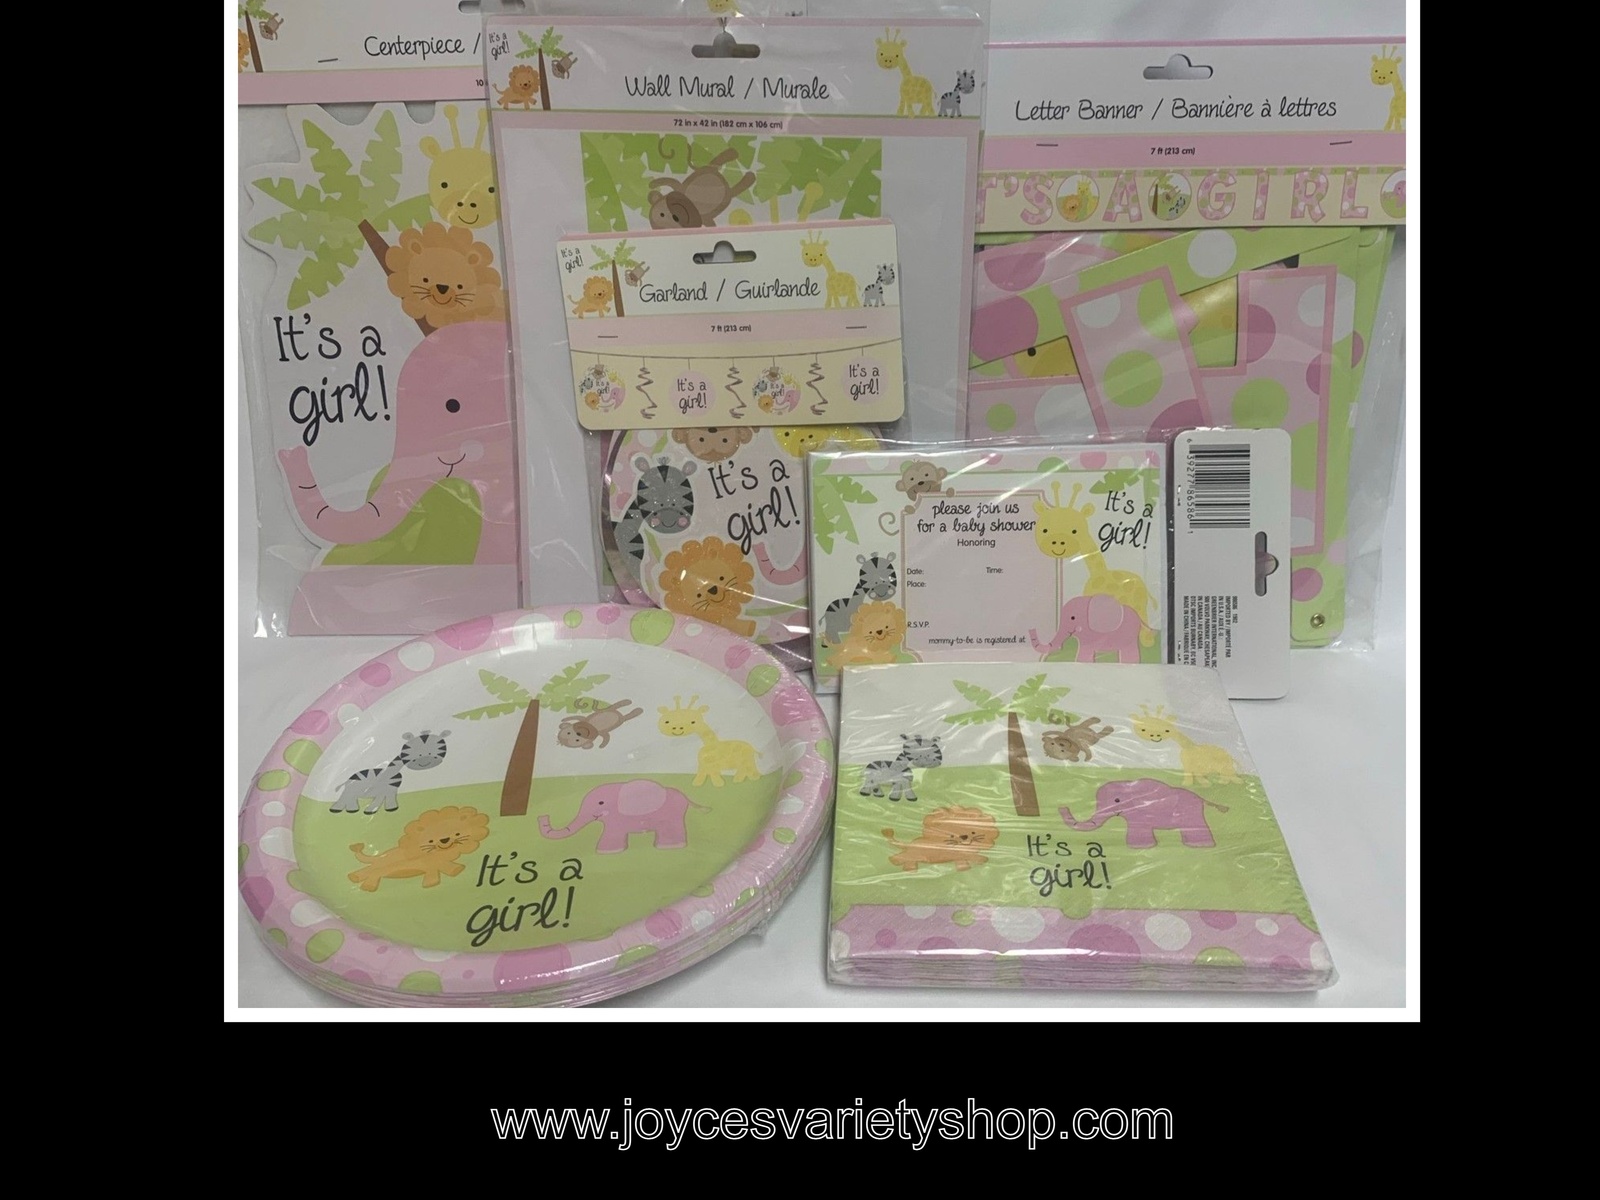 Primary image for Baby Girl Decor Party Pk (7) Plates Napkins Swirls Invites Centerpiece Mural +